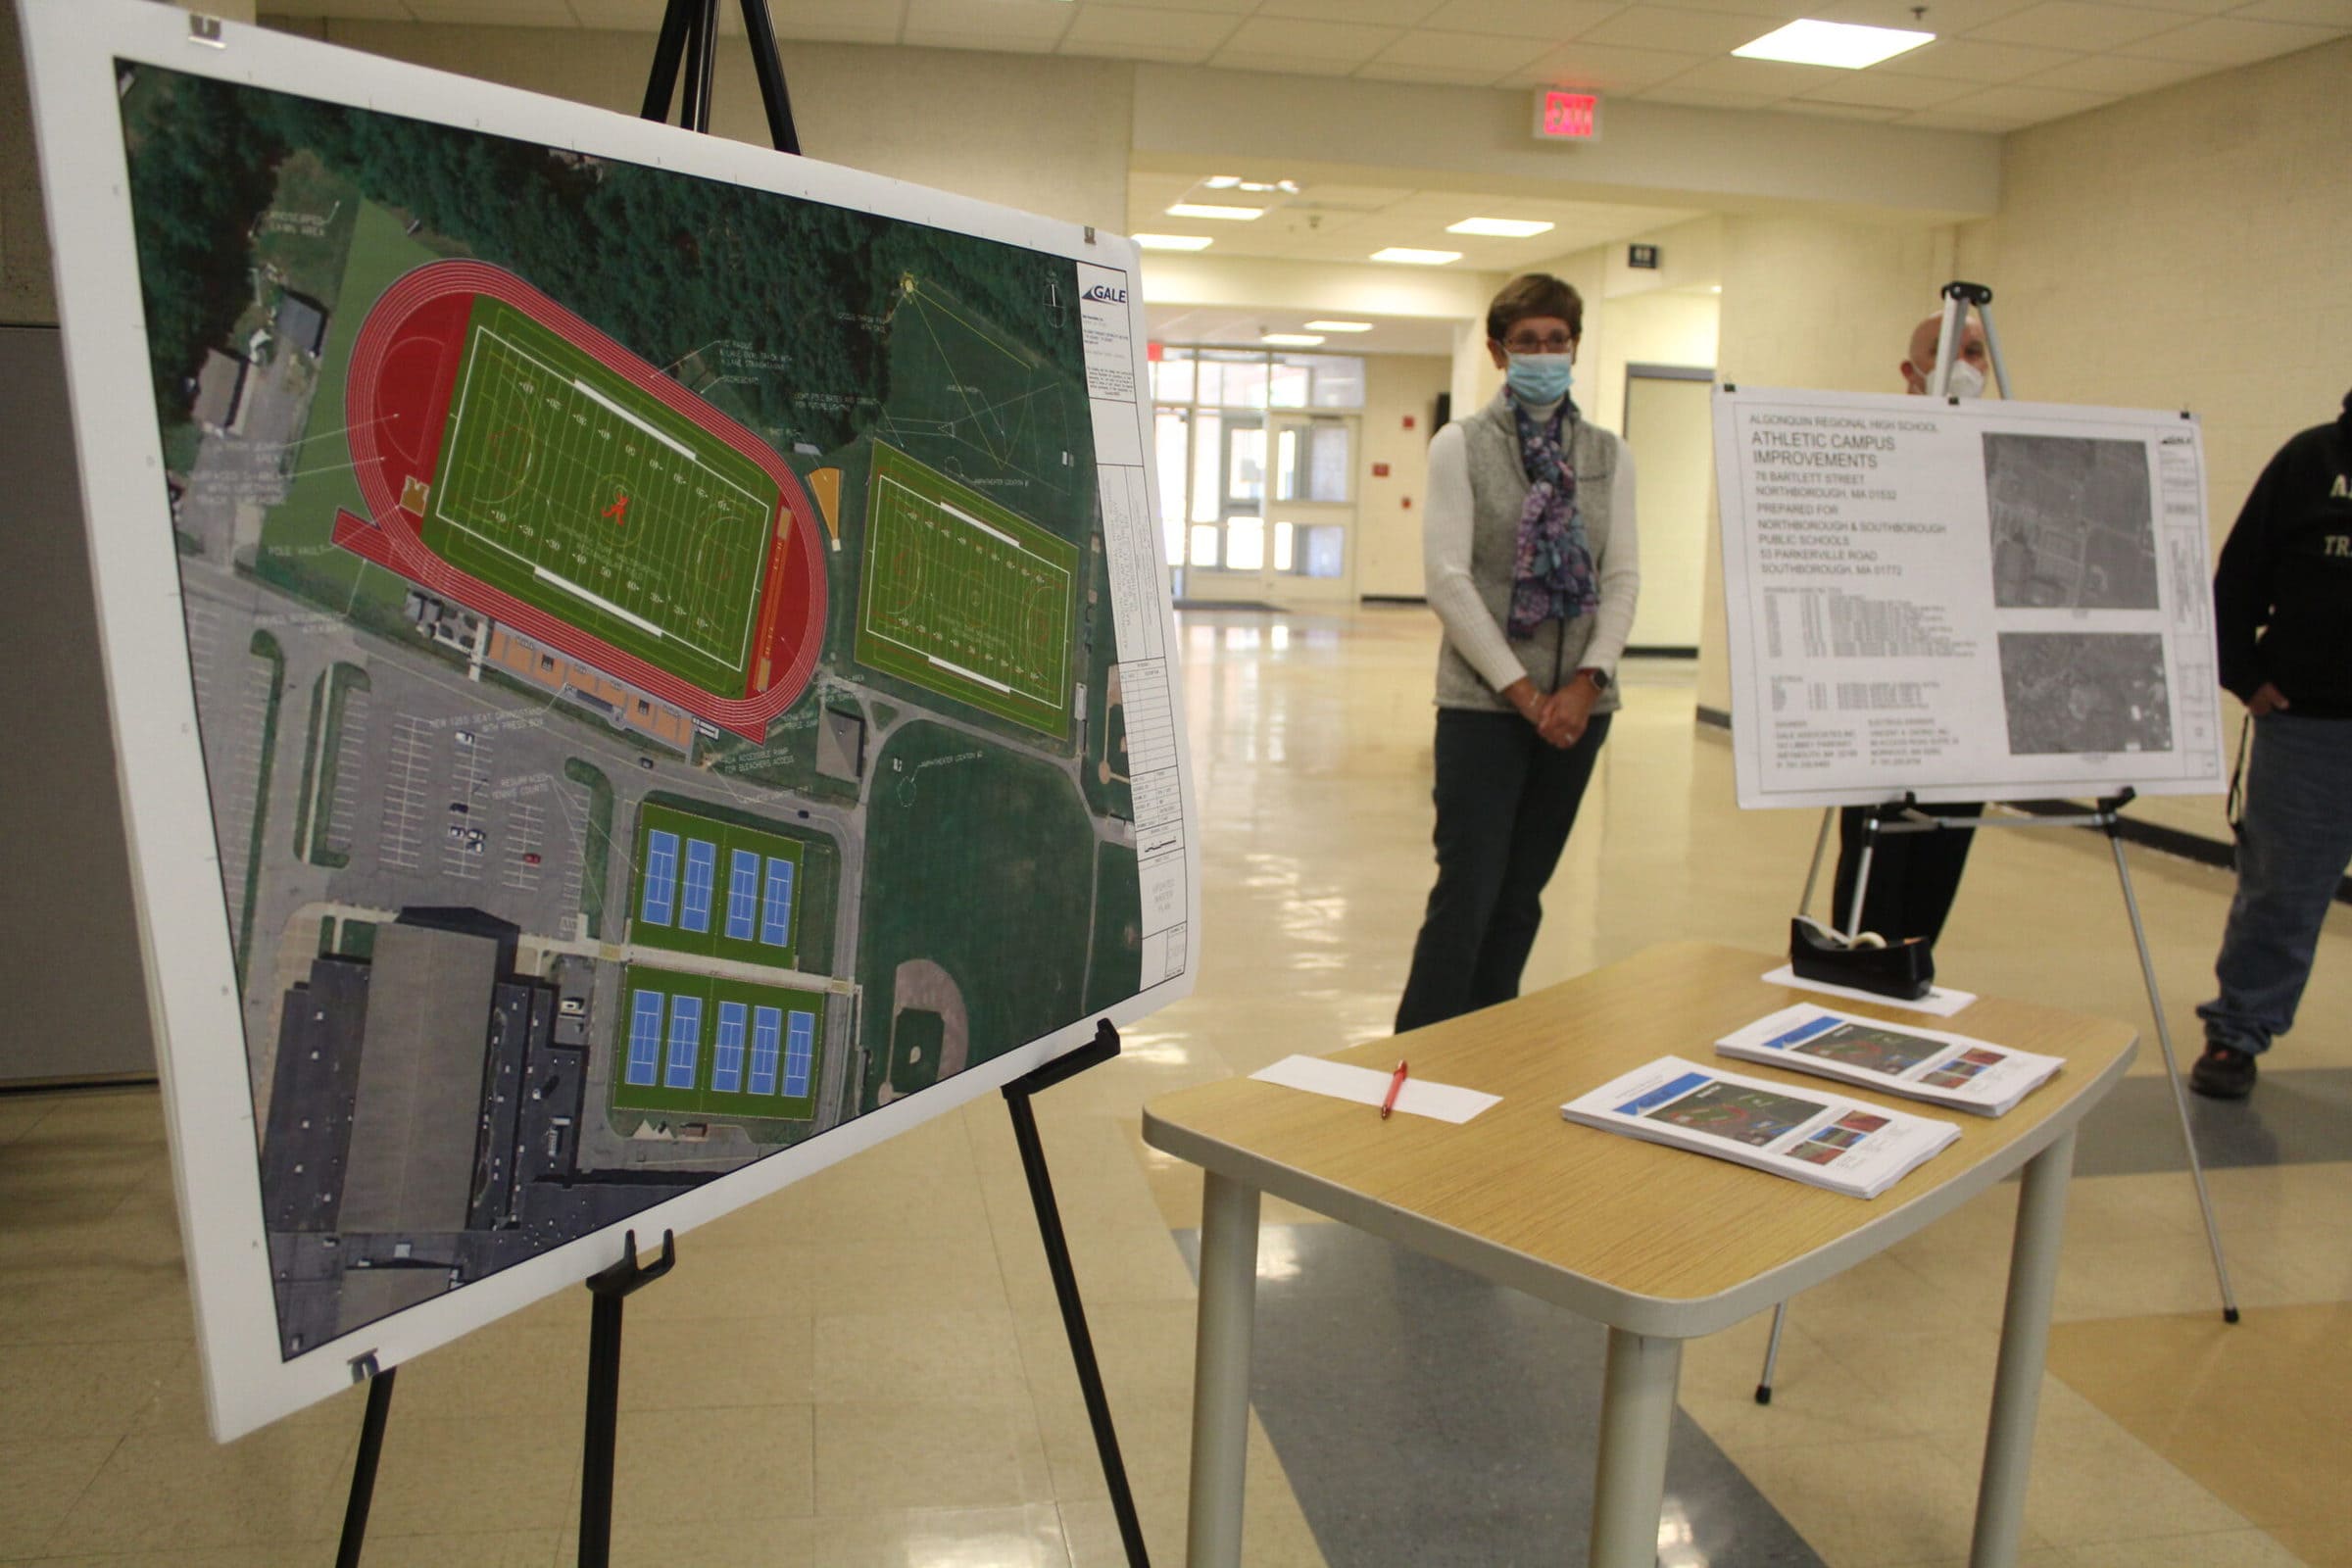 Northborough approves ARHS athletic complex at Town Meeting